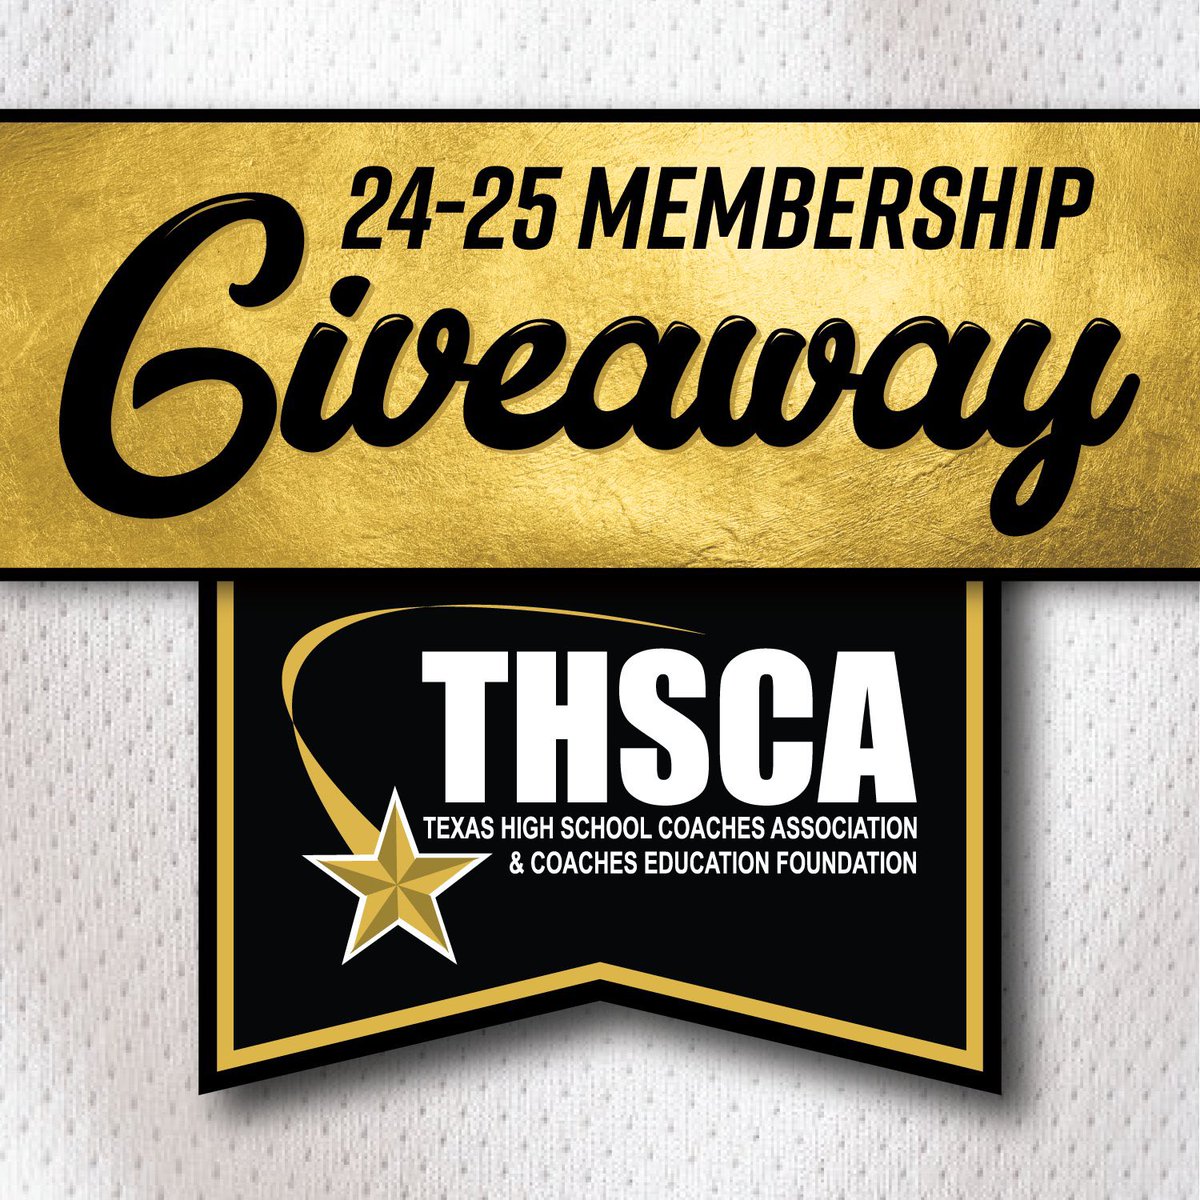 I need 5 coaches who have NEVER been a THSCA member before! I have a complimentary membership for you! Come be a part of one of the GREATEST organizations that’s all about helping kids! @THSCAcoaches #THSCABrandAmbassador @BastropISD